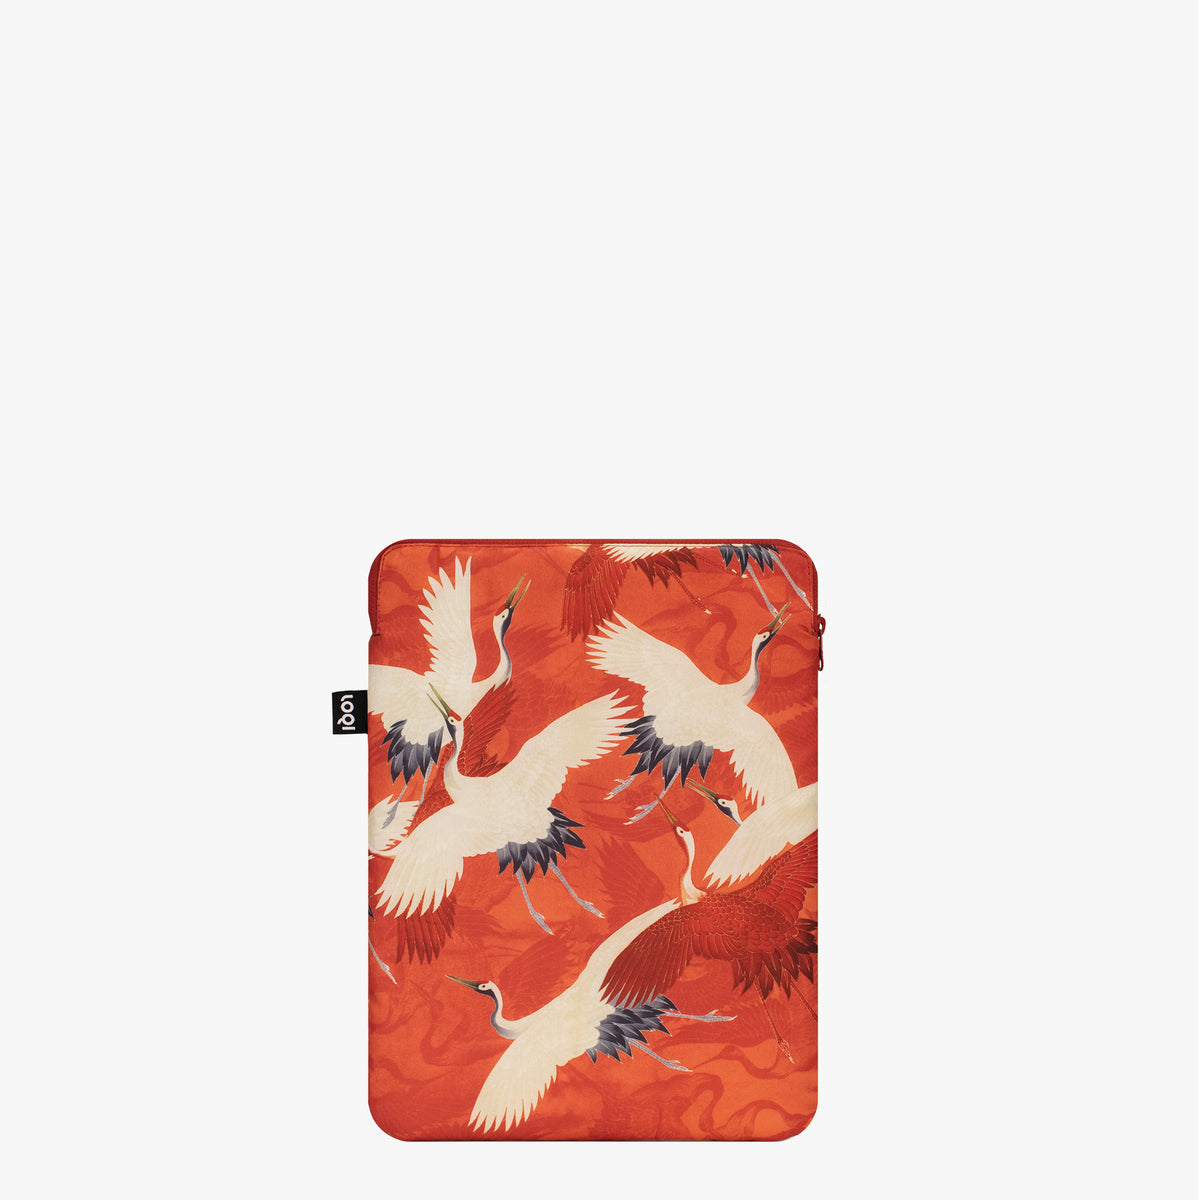 Woman&#39;s Haori with White and Red Cranes Recycled Laptop Cover 24 x 33 cm